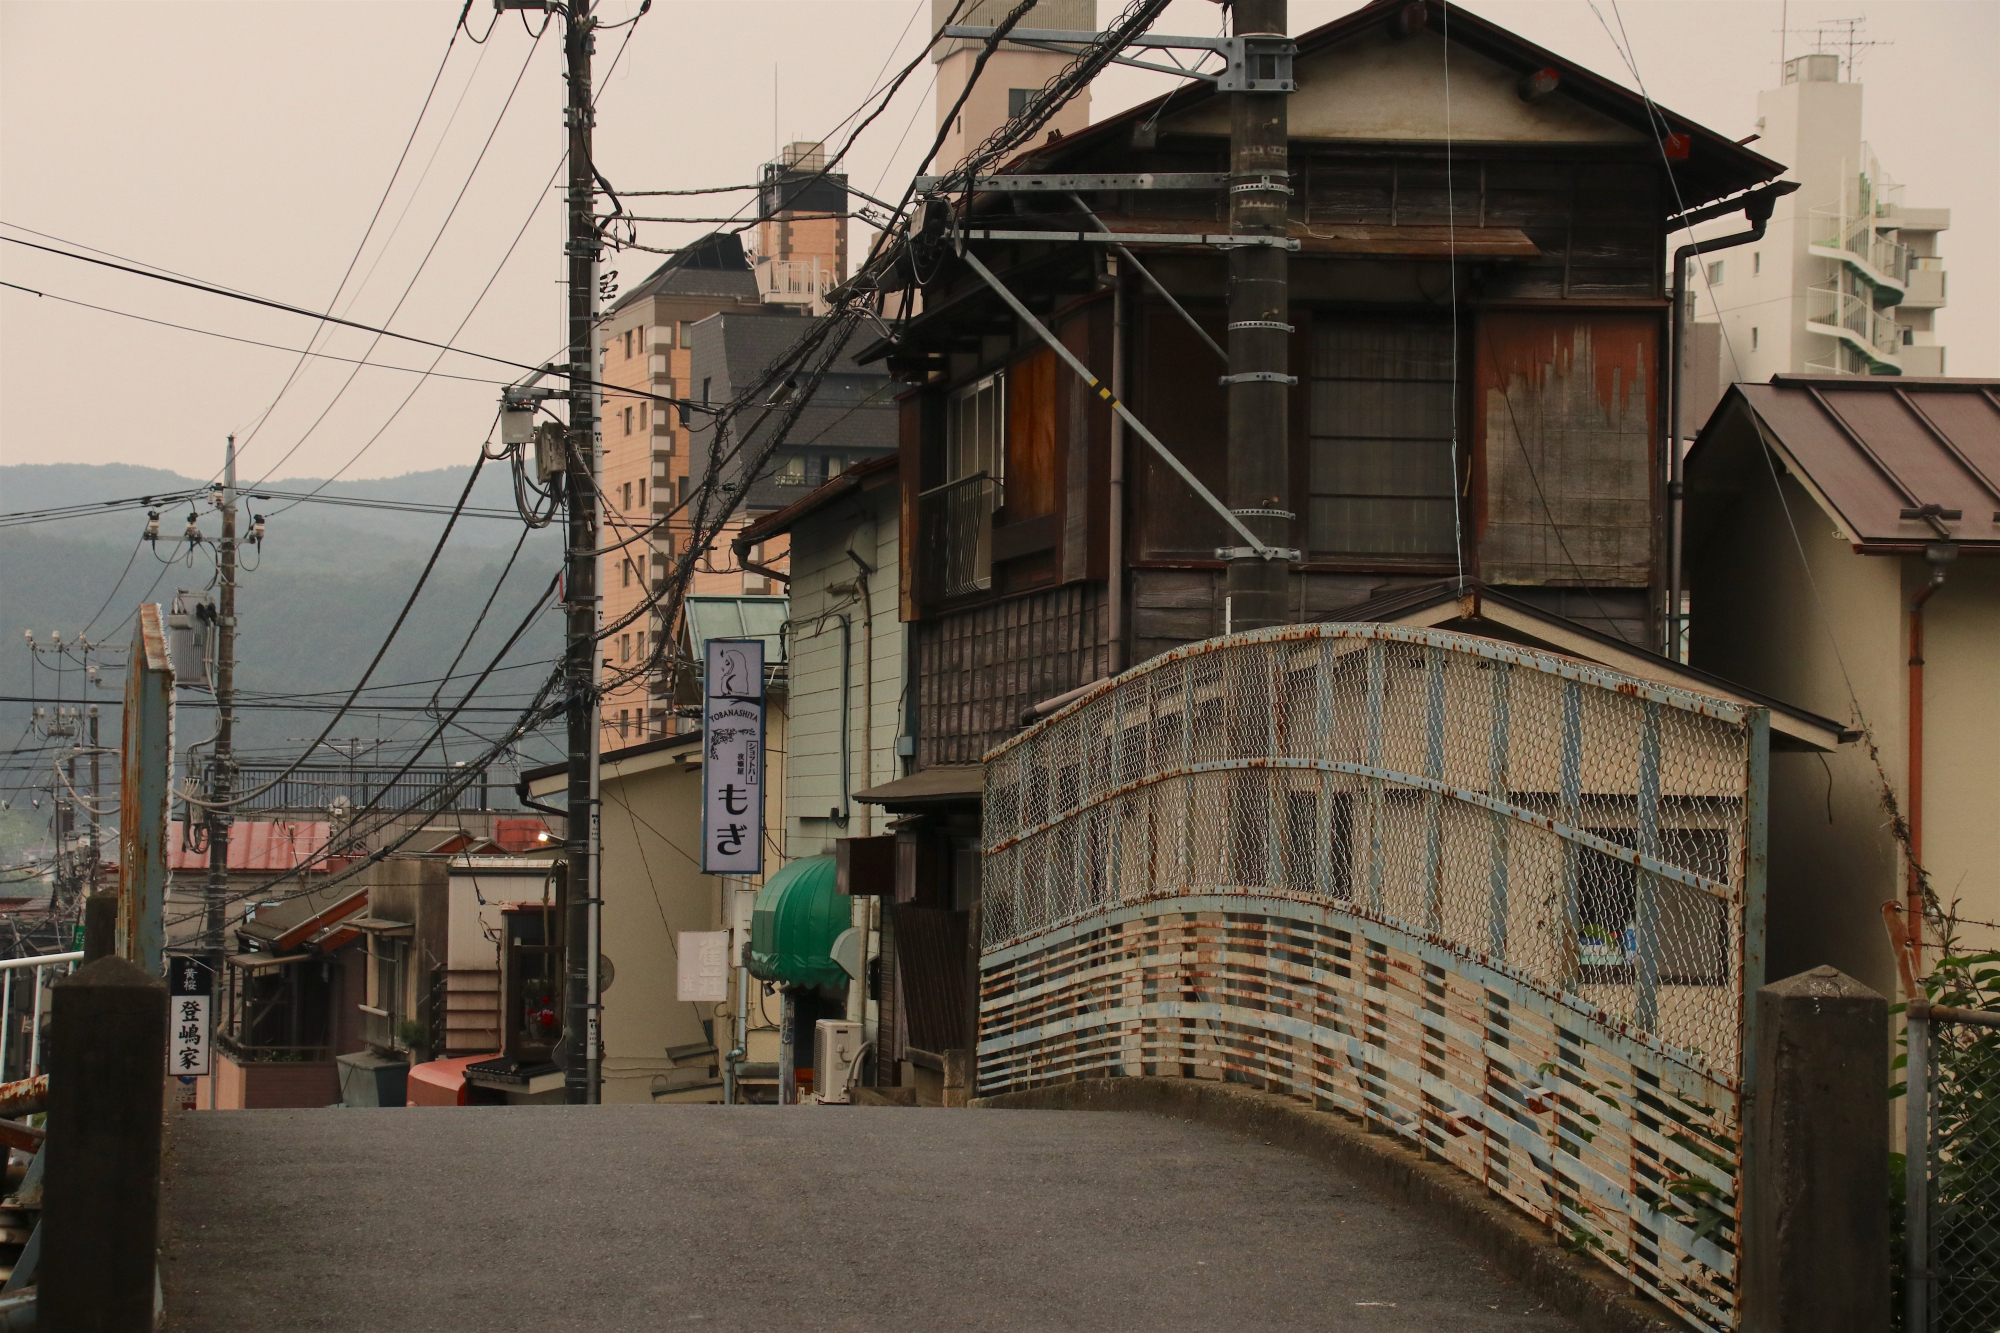 Historically significant: From as early as 1150, Ome was an established area of fine silk production and, during the Edo Period (1603-1868), became a crucial shukuba (post station) on the Ome Kaido road to Edo. | KIT NAGAMURA